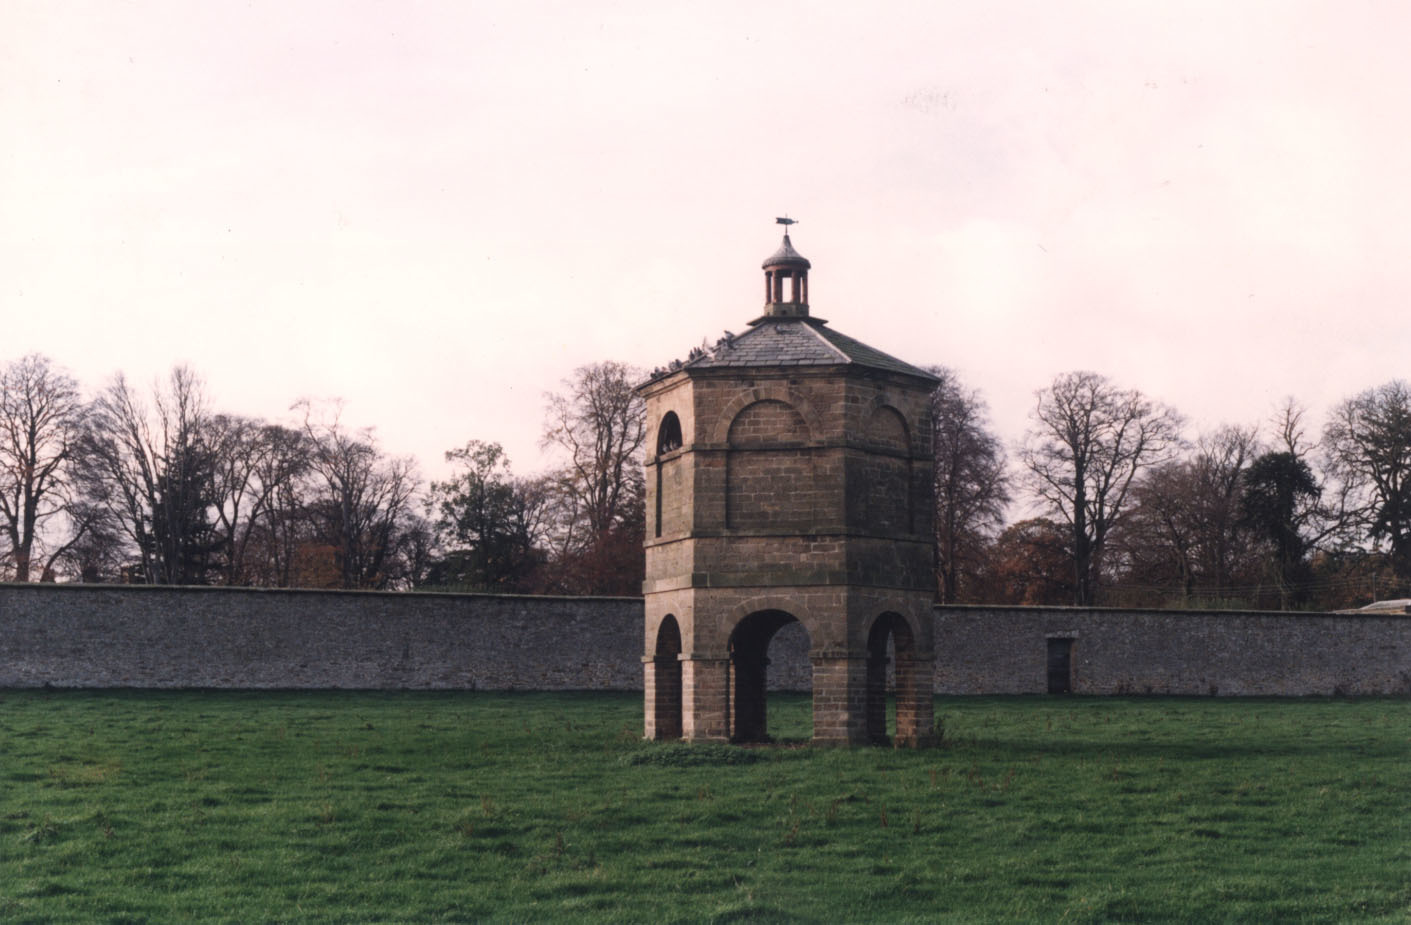 The most decorative dovecote in the district at Forcett has many similarities to a bandstand in the Vauxhall pleasure gardens in London